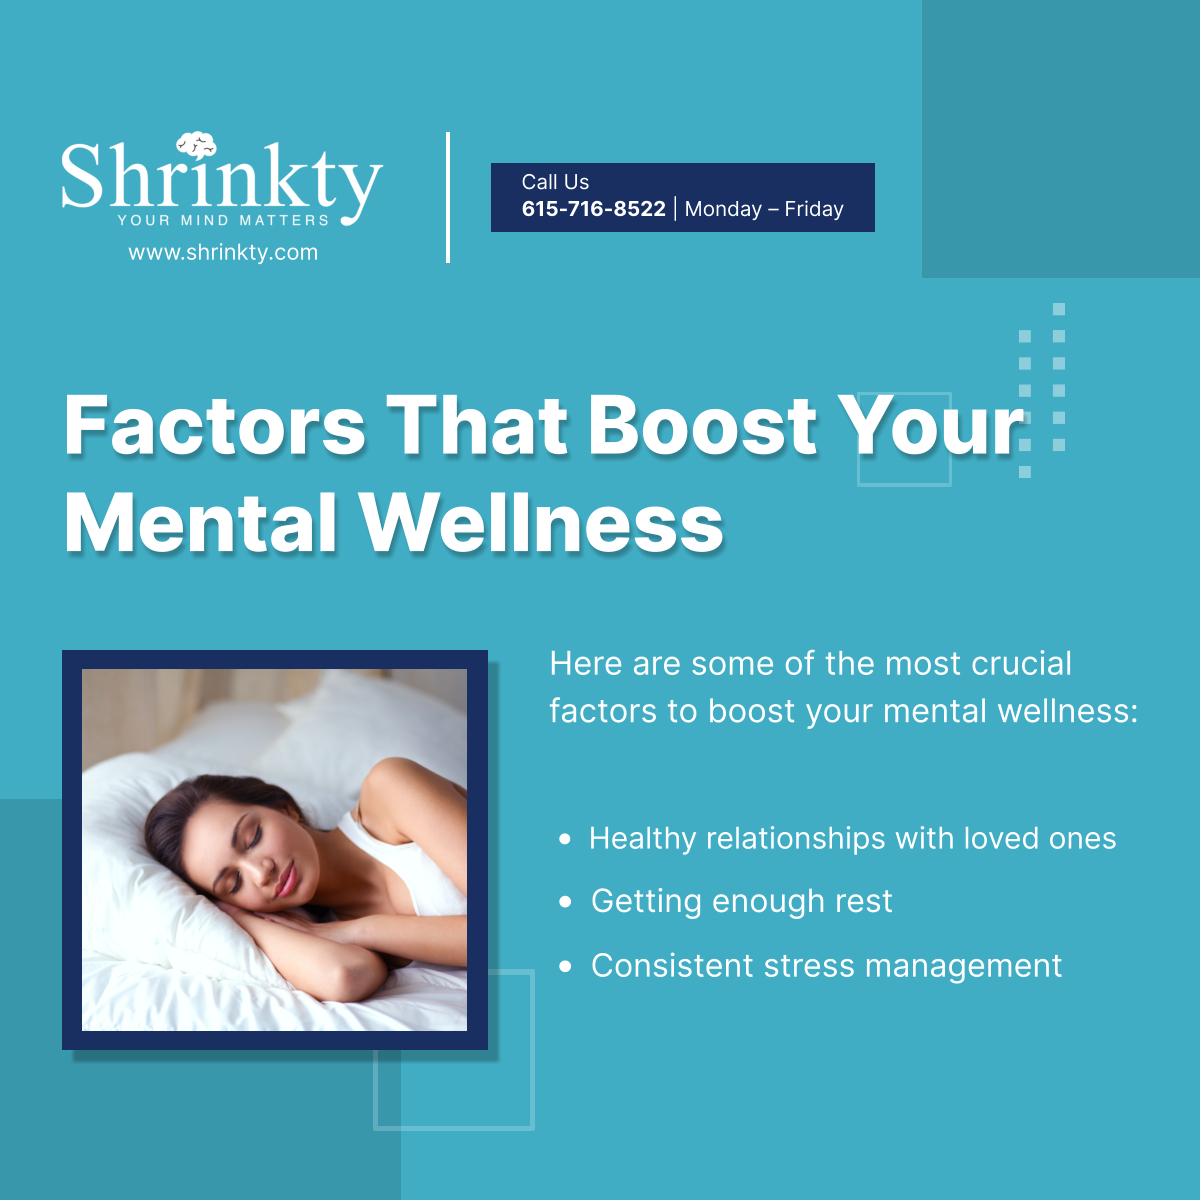 A range of factors can affect the state of your mental wellness. Be sure to surround yourself with the factors that help alleviate the state of your mental health. 

#Tennessee #MentalHealthTips #MentalHealthCare